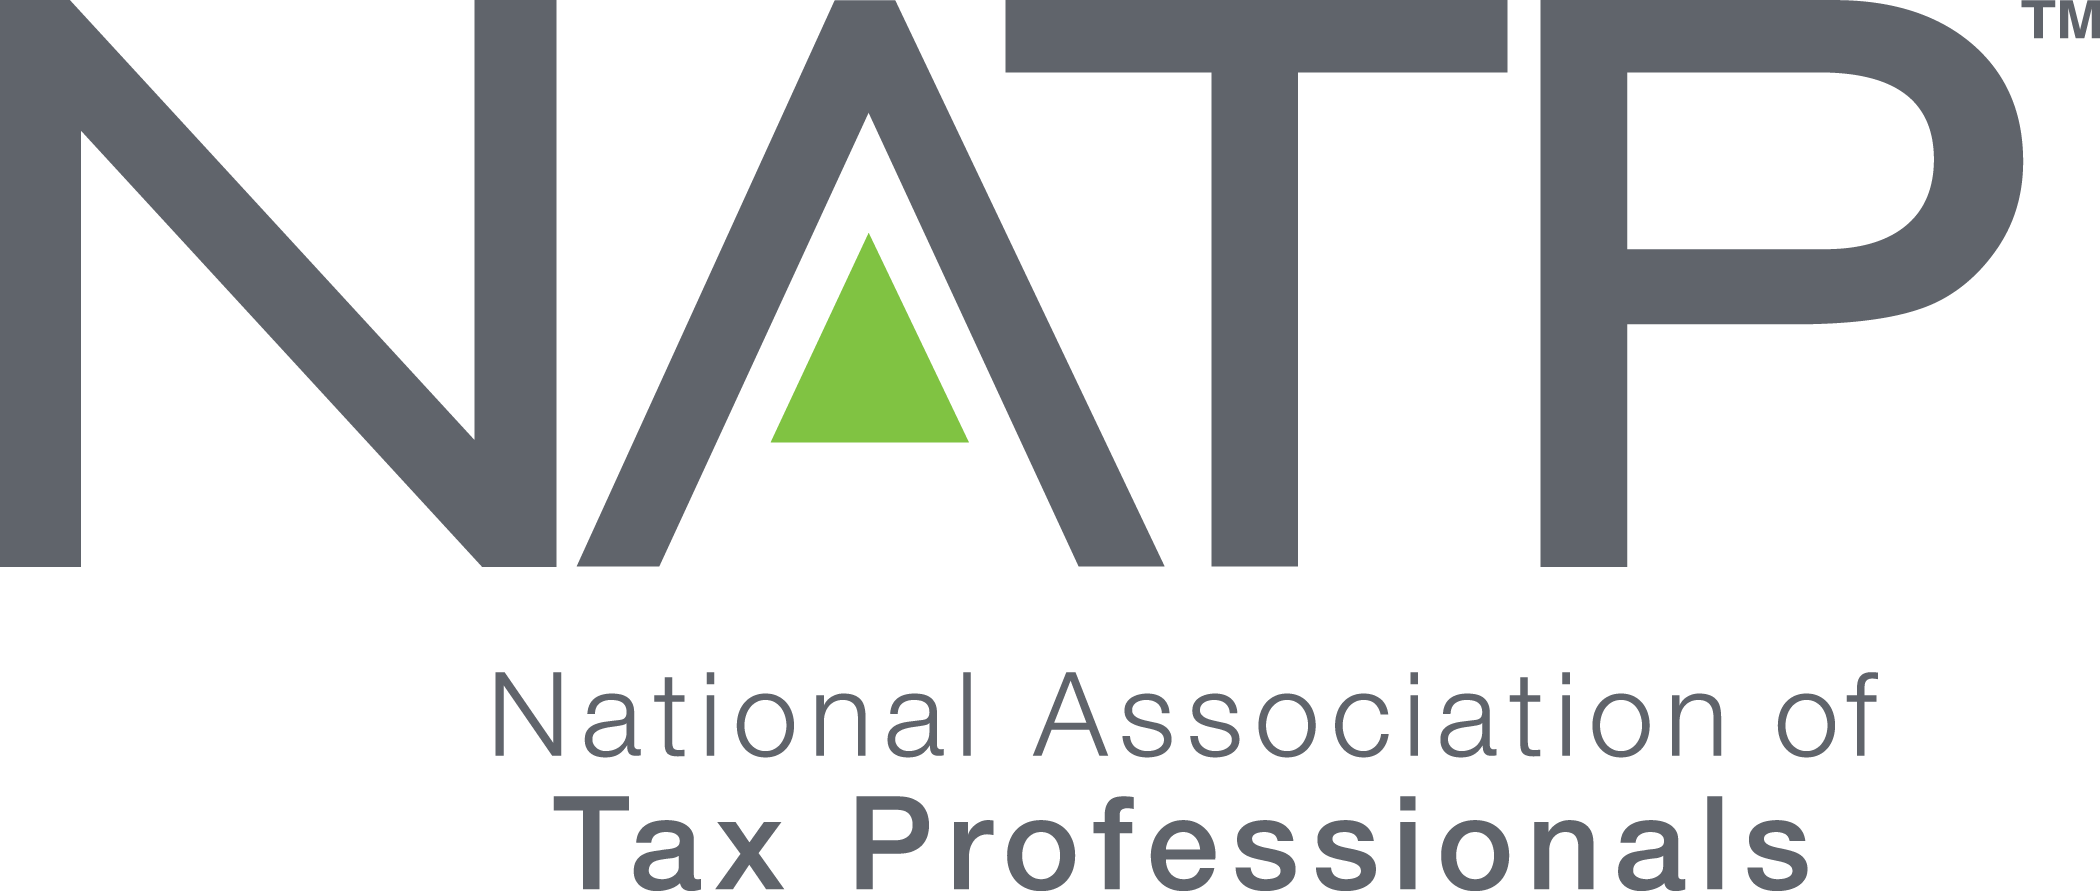 IRS s WISP serves as great starting point for tax firms ahead of 2023